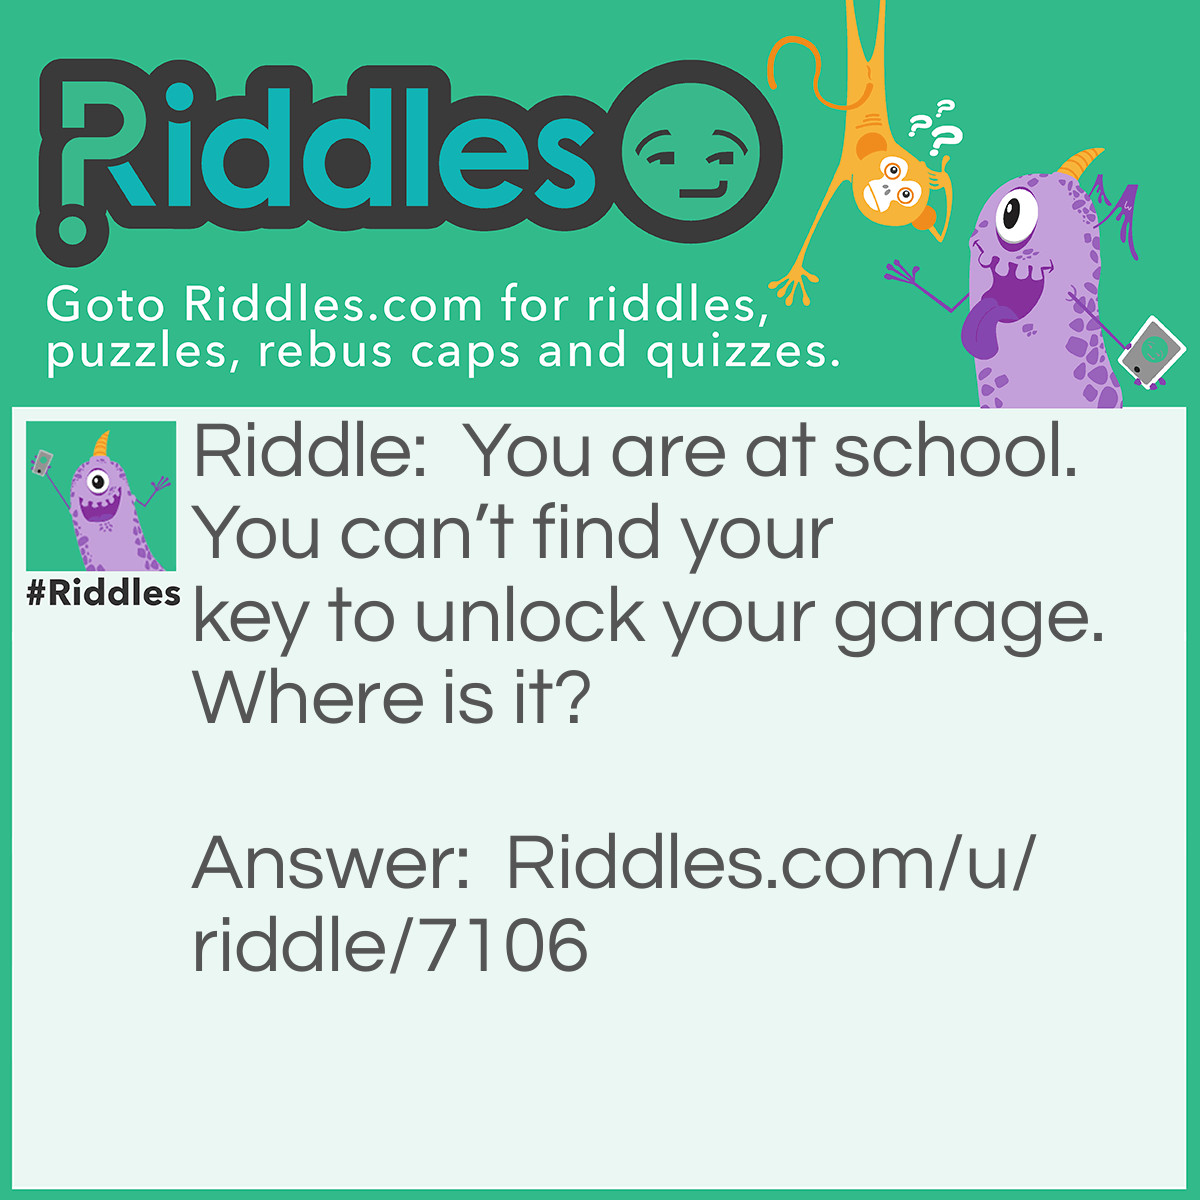 Riddle: You are at school. You can't find your key to unlock your garage. Where is it? Answer: At home.